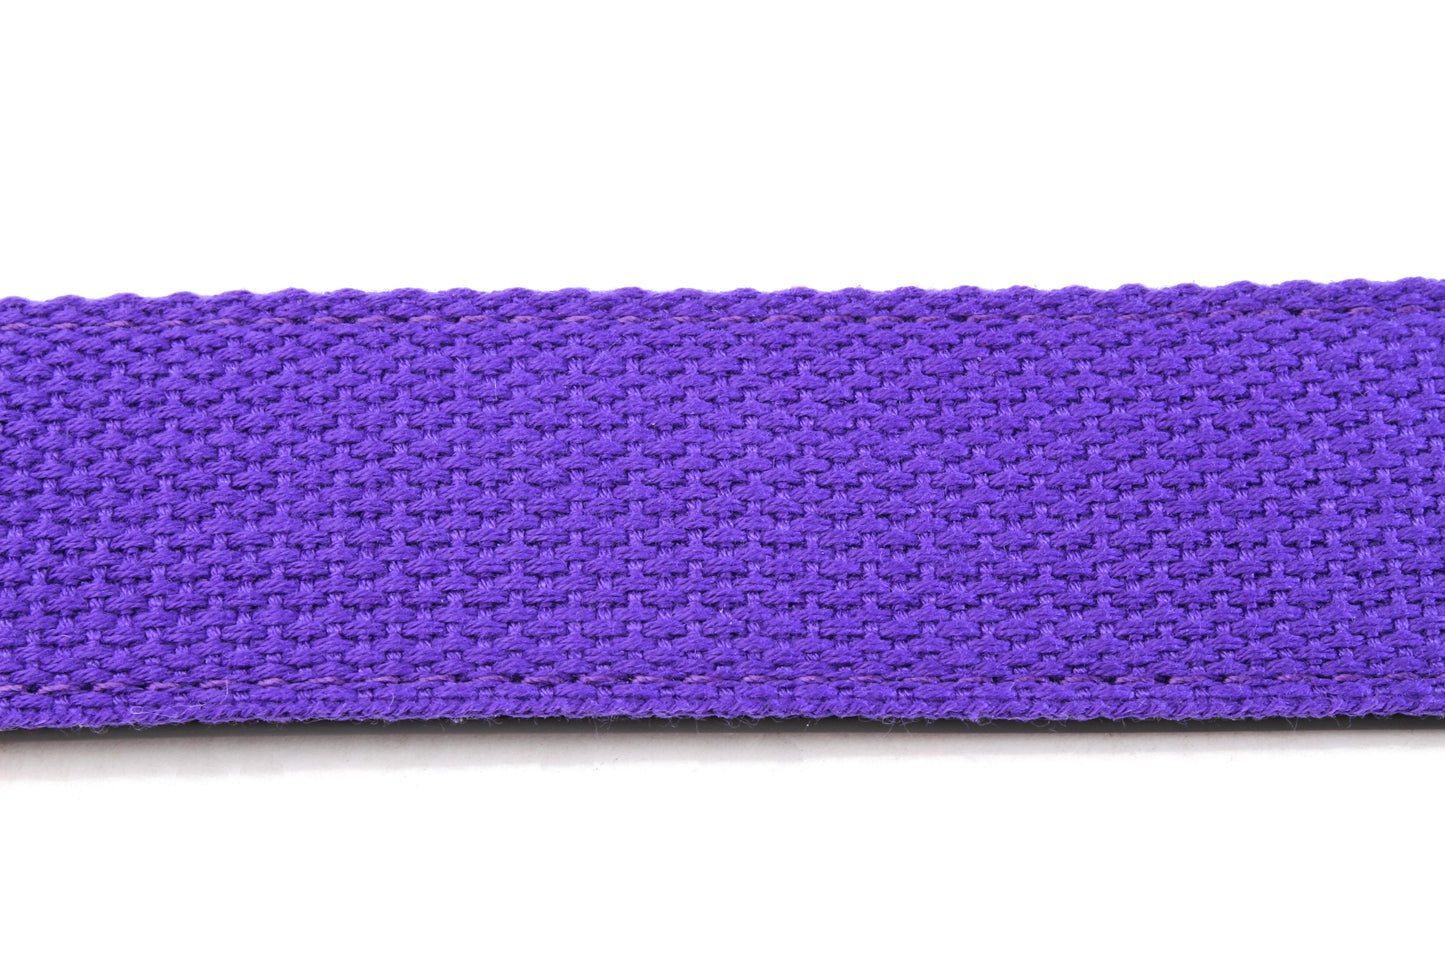 Men's canvas belt strap in purple, 1.5 inches wide, casual look, stitching close up